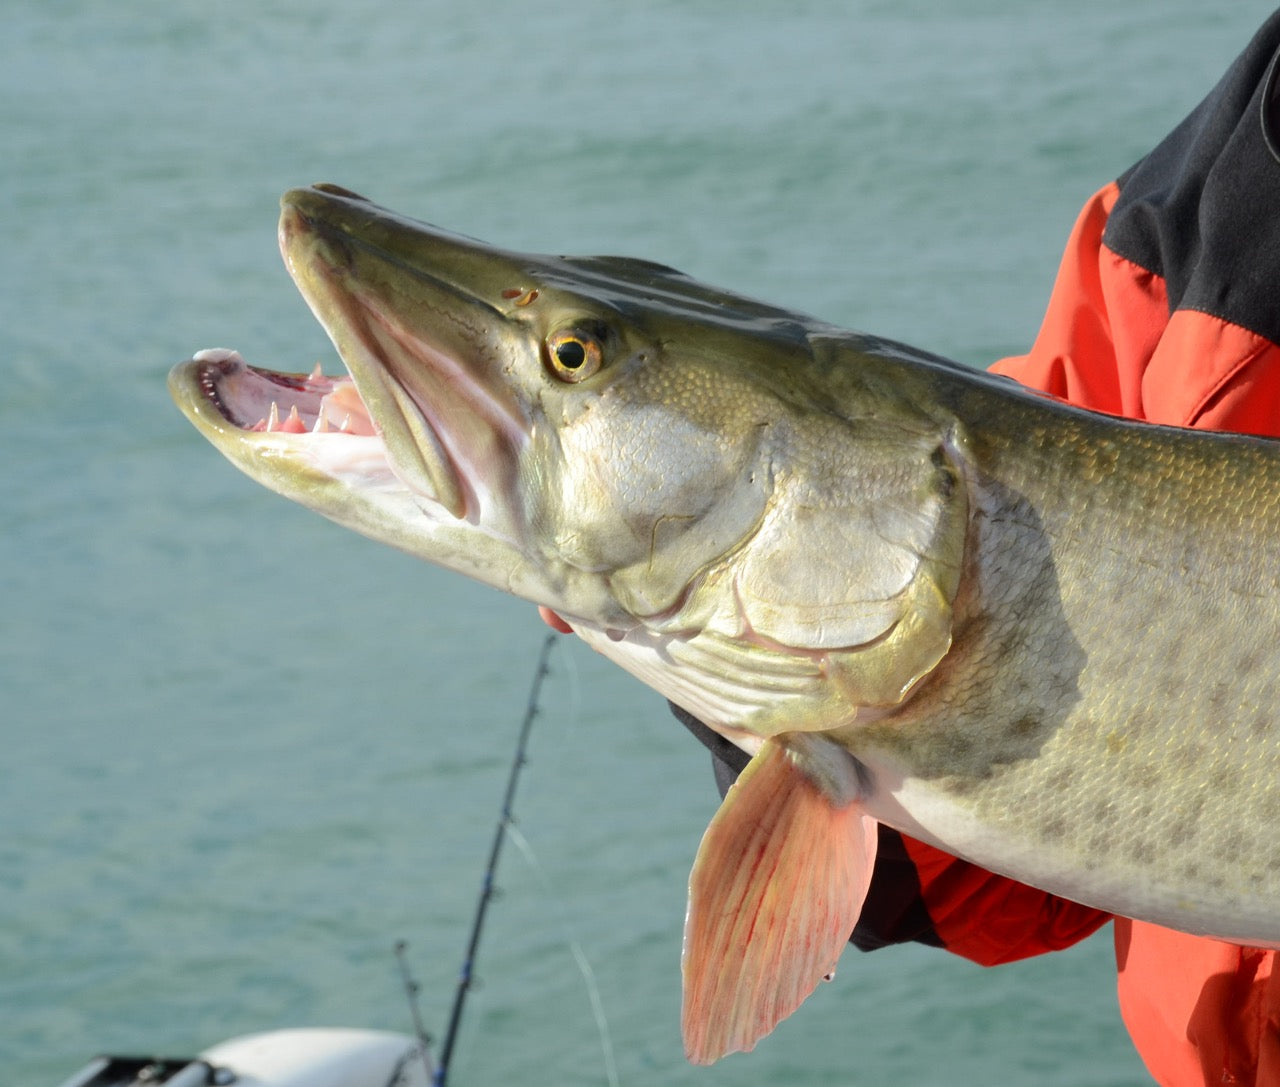 Muskie Fishing Guide: The Best Fishing Lures to Use - Niagara Fish Assassins